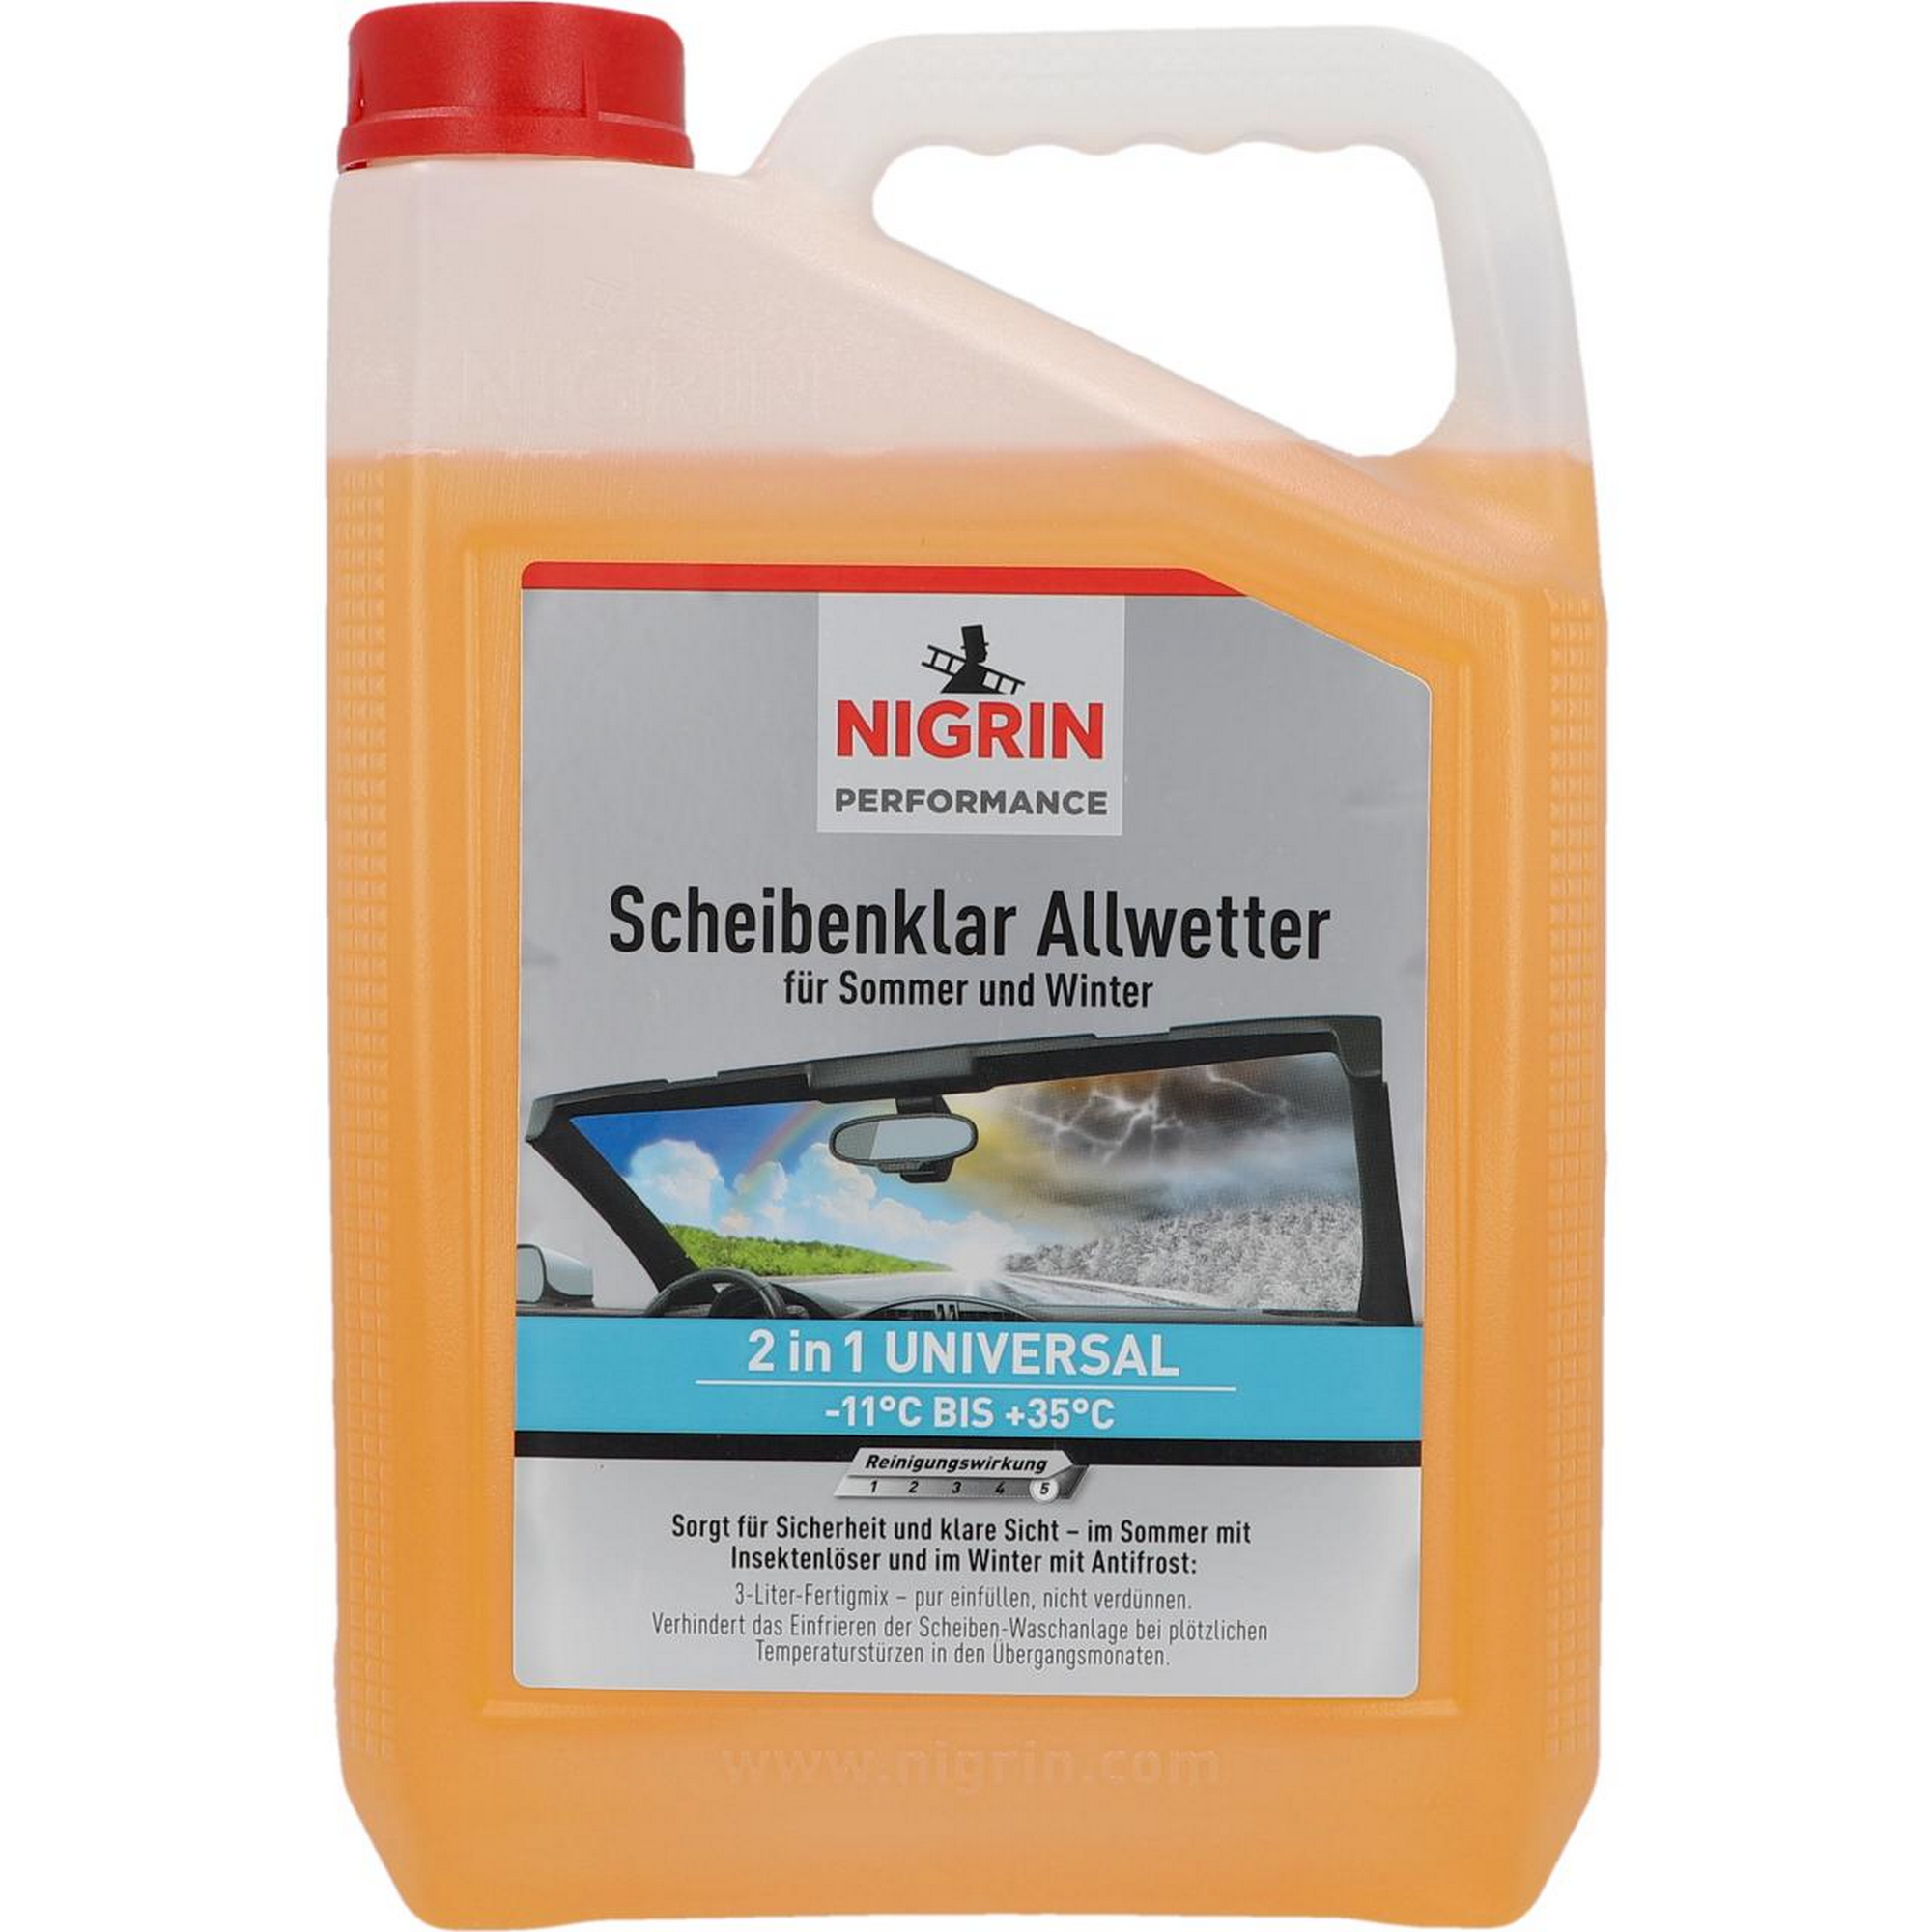 Scheibenklar "Performance" Allwetter 2in1 3 l + product picture